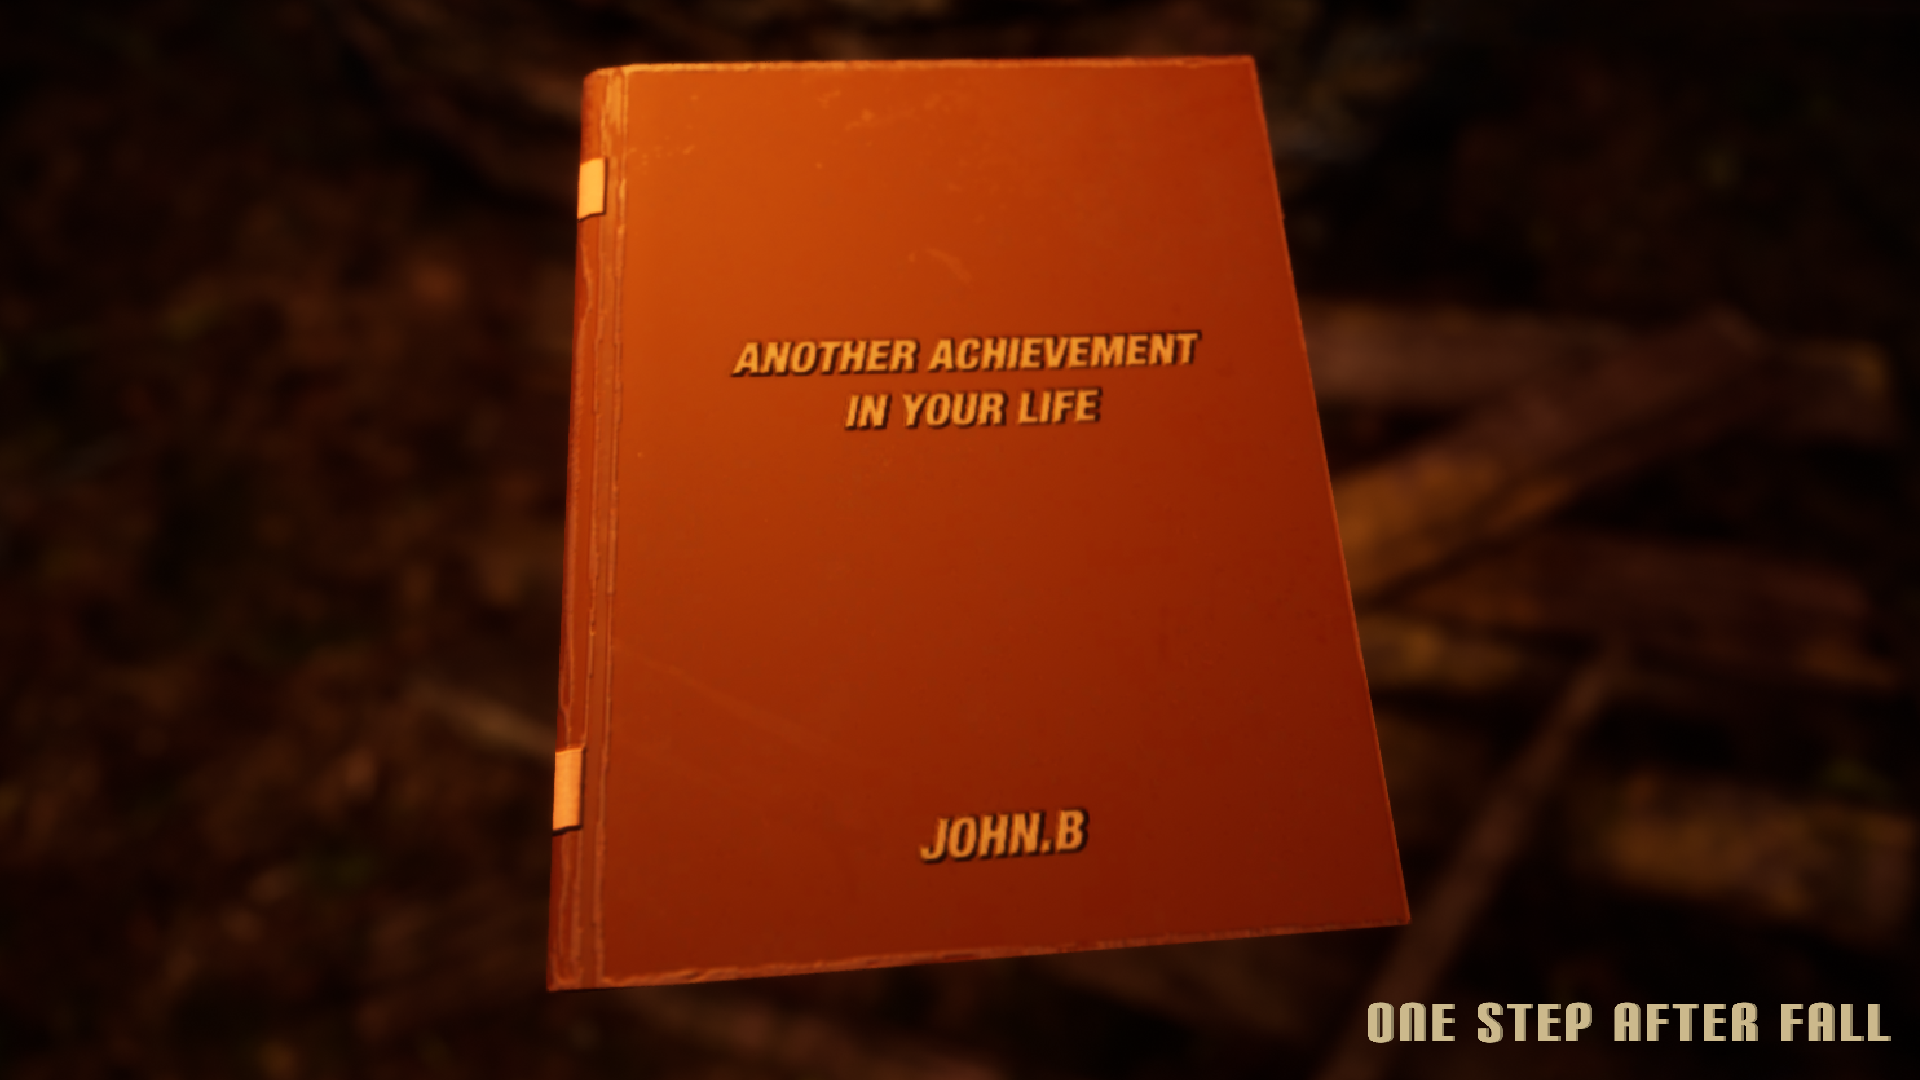 One more achievement in your life